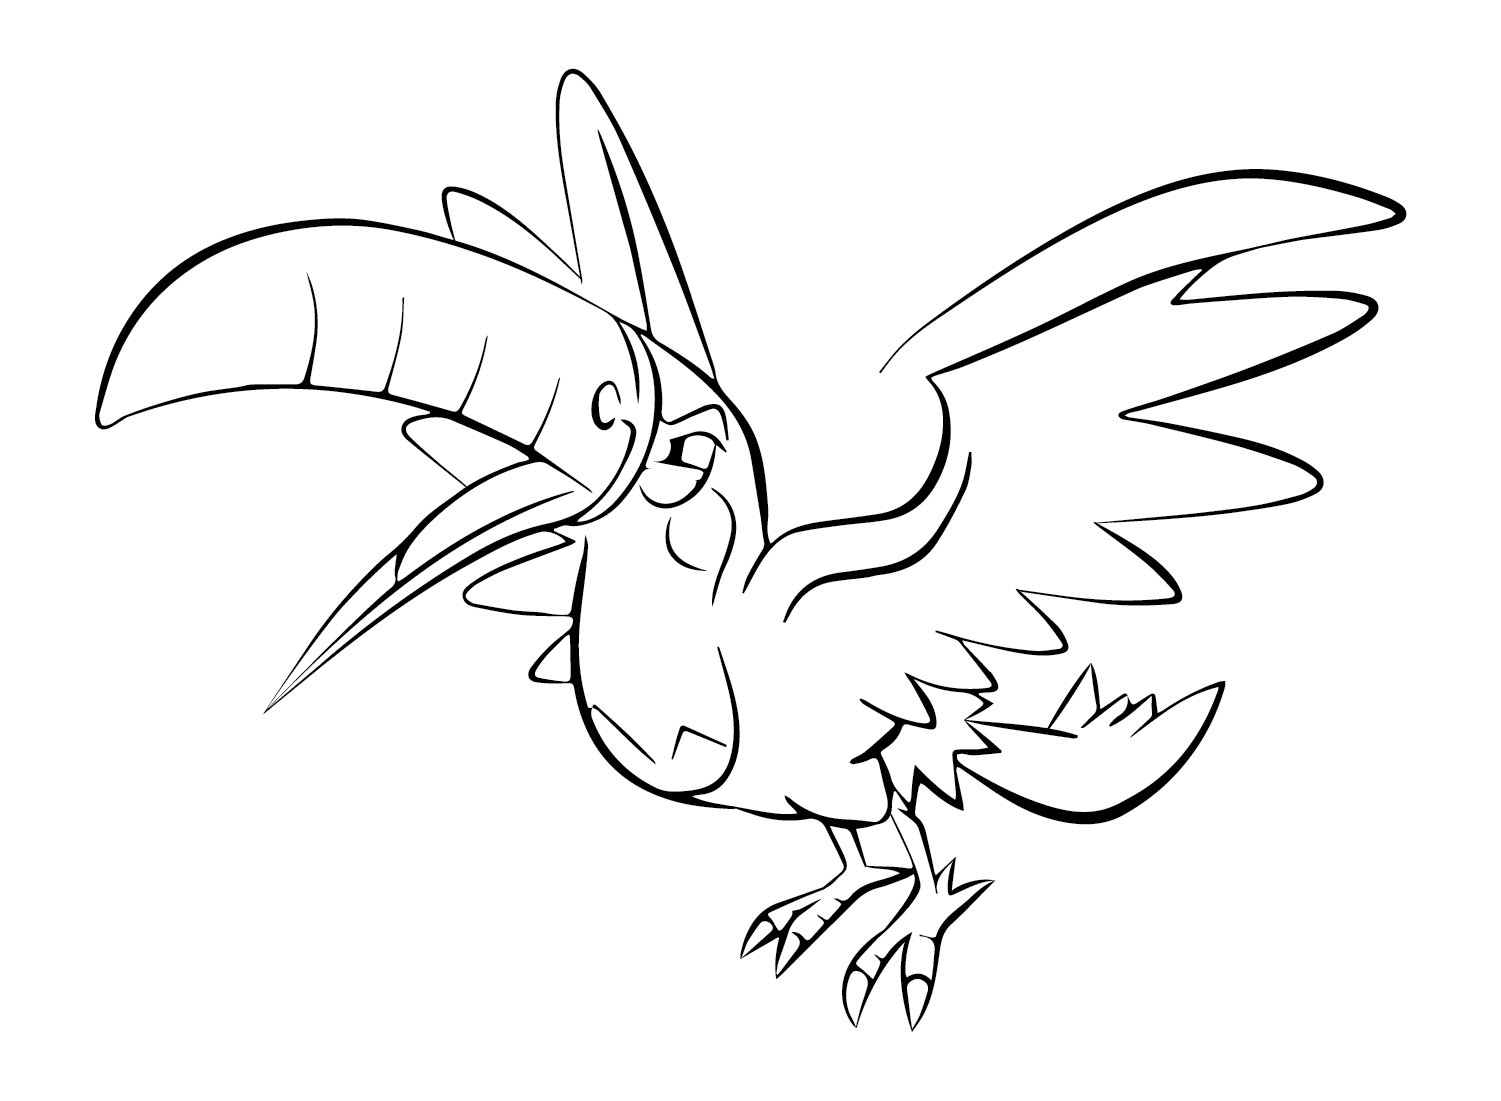 Toucannon Free Coloring Page - Free Printable Coloring Pages